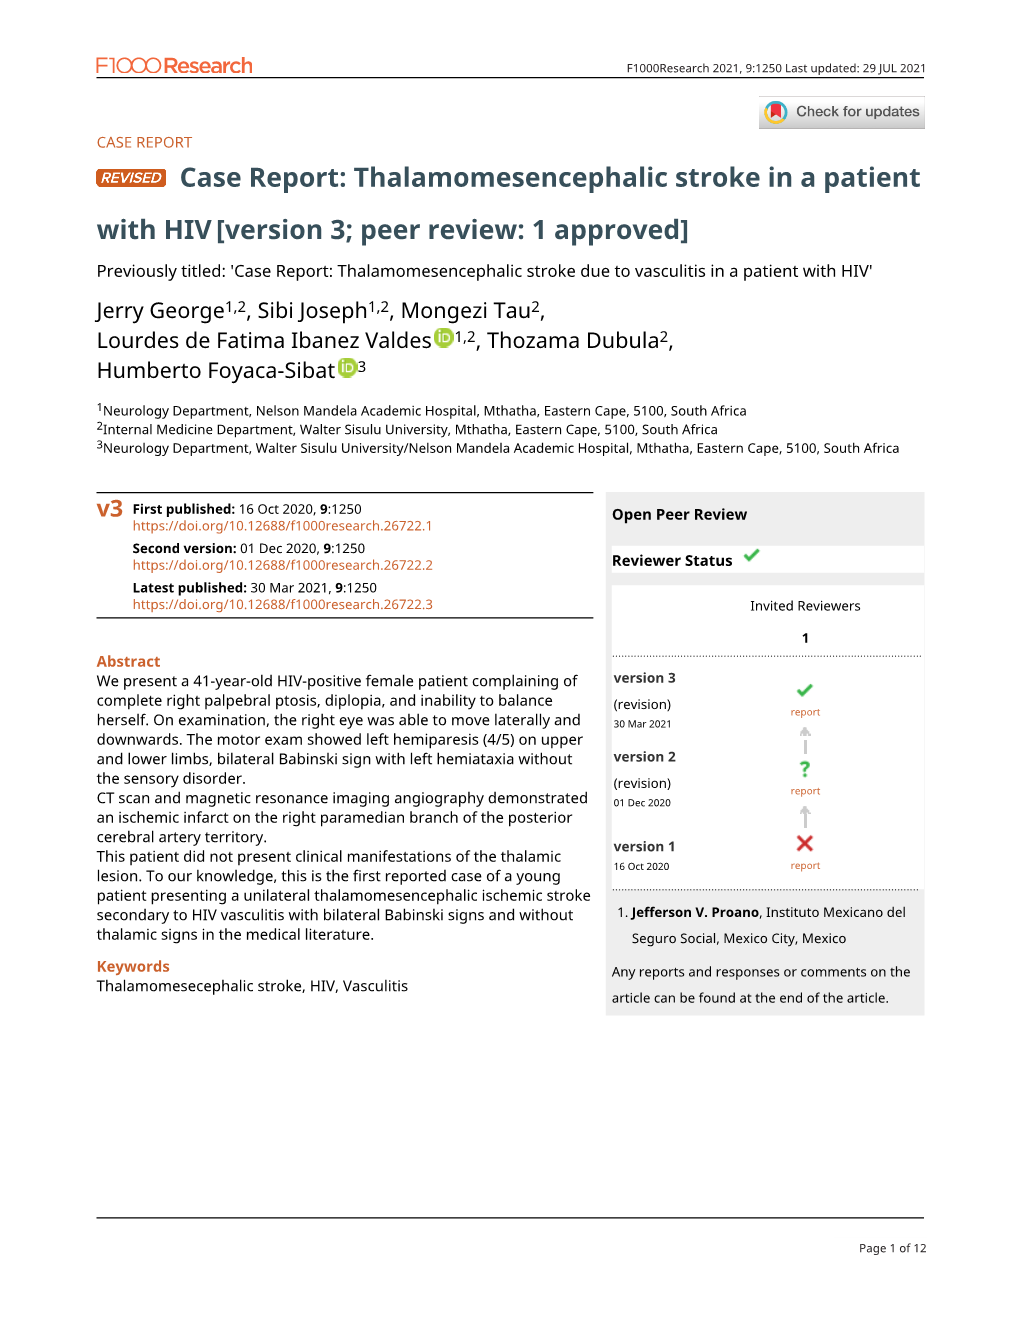 Thalamomesencephalic Stroke in a Patient with HIV[Version 3; Peer